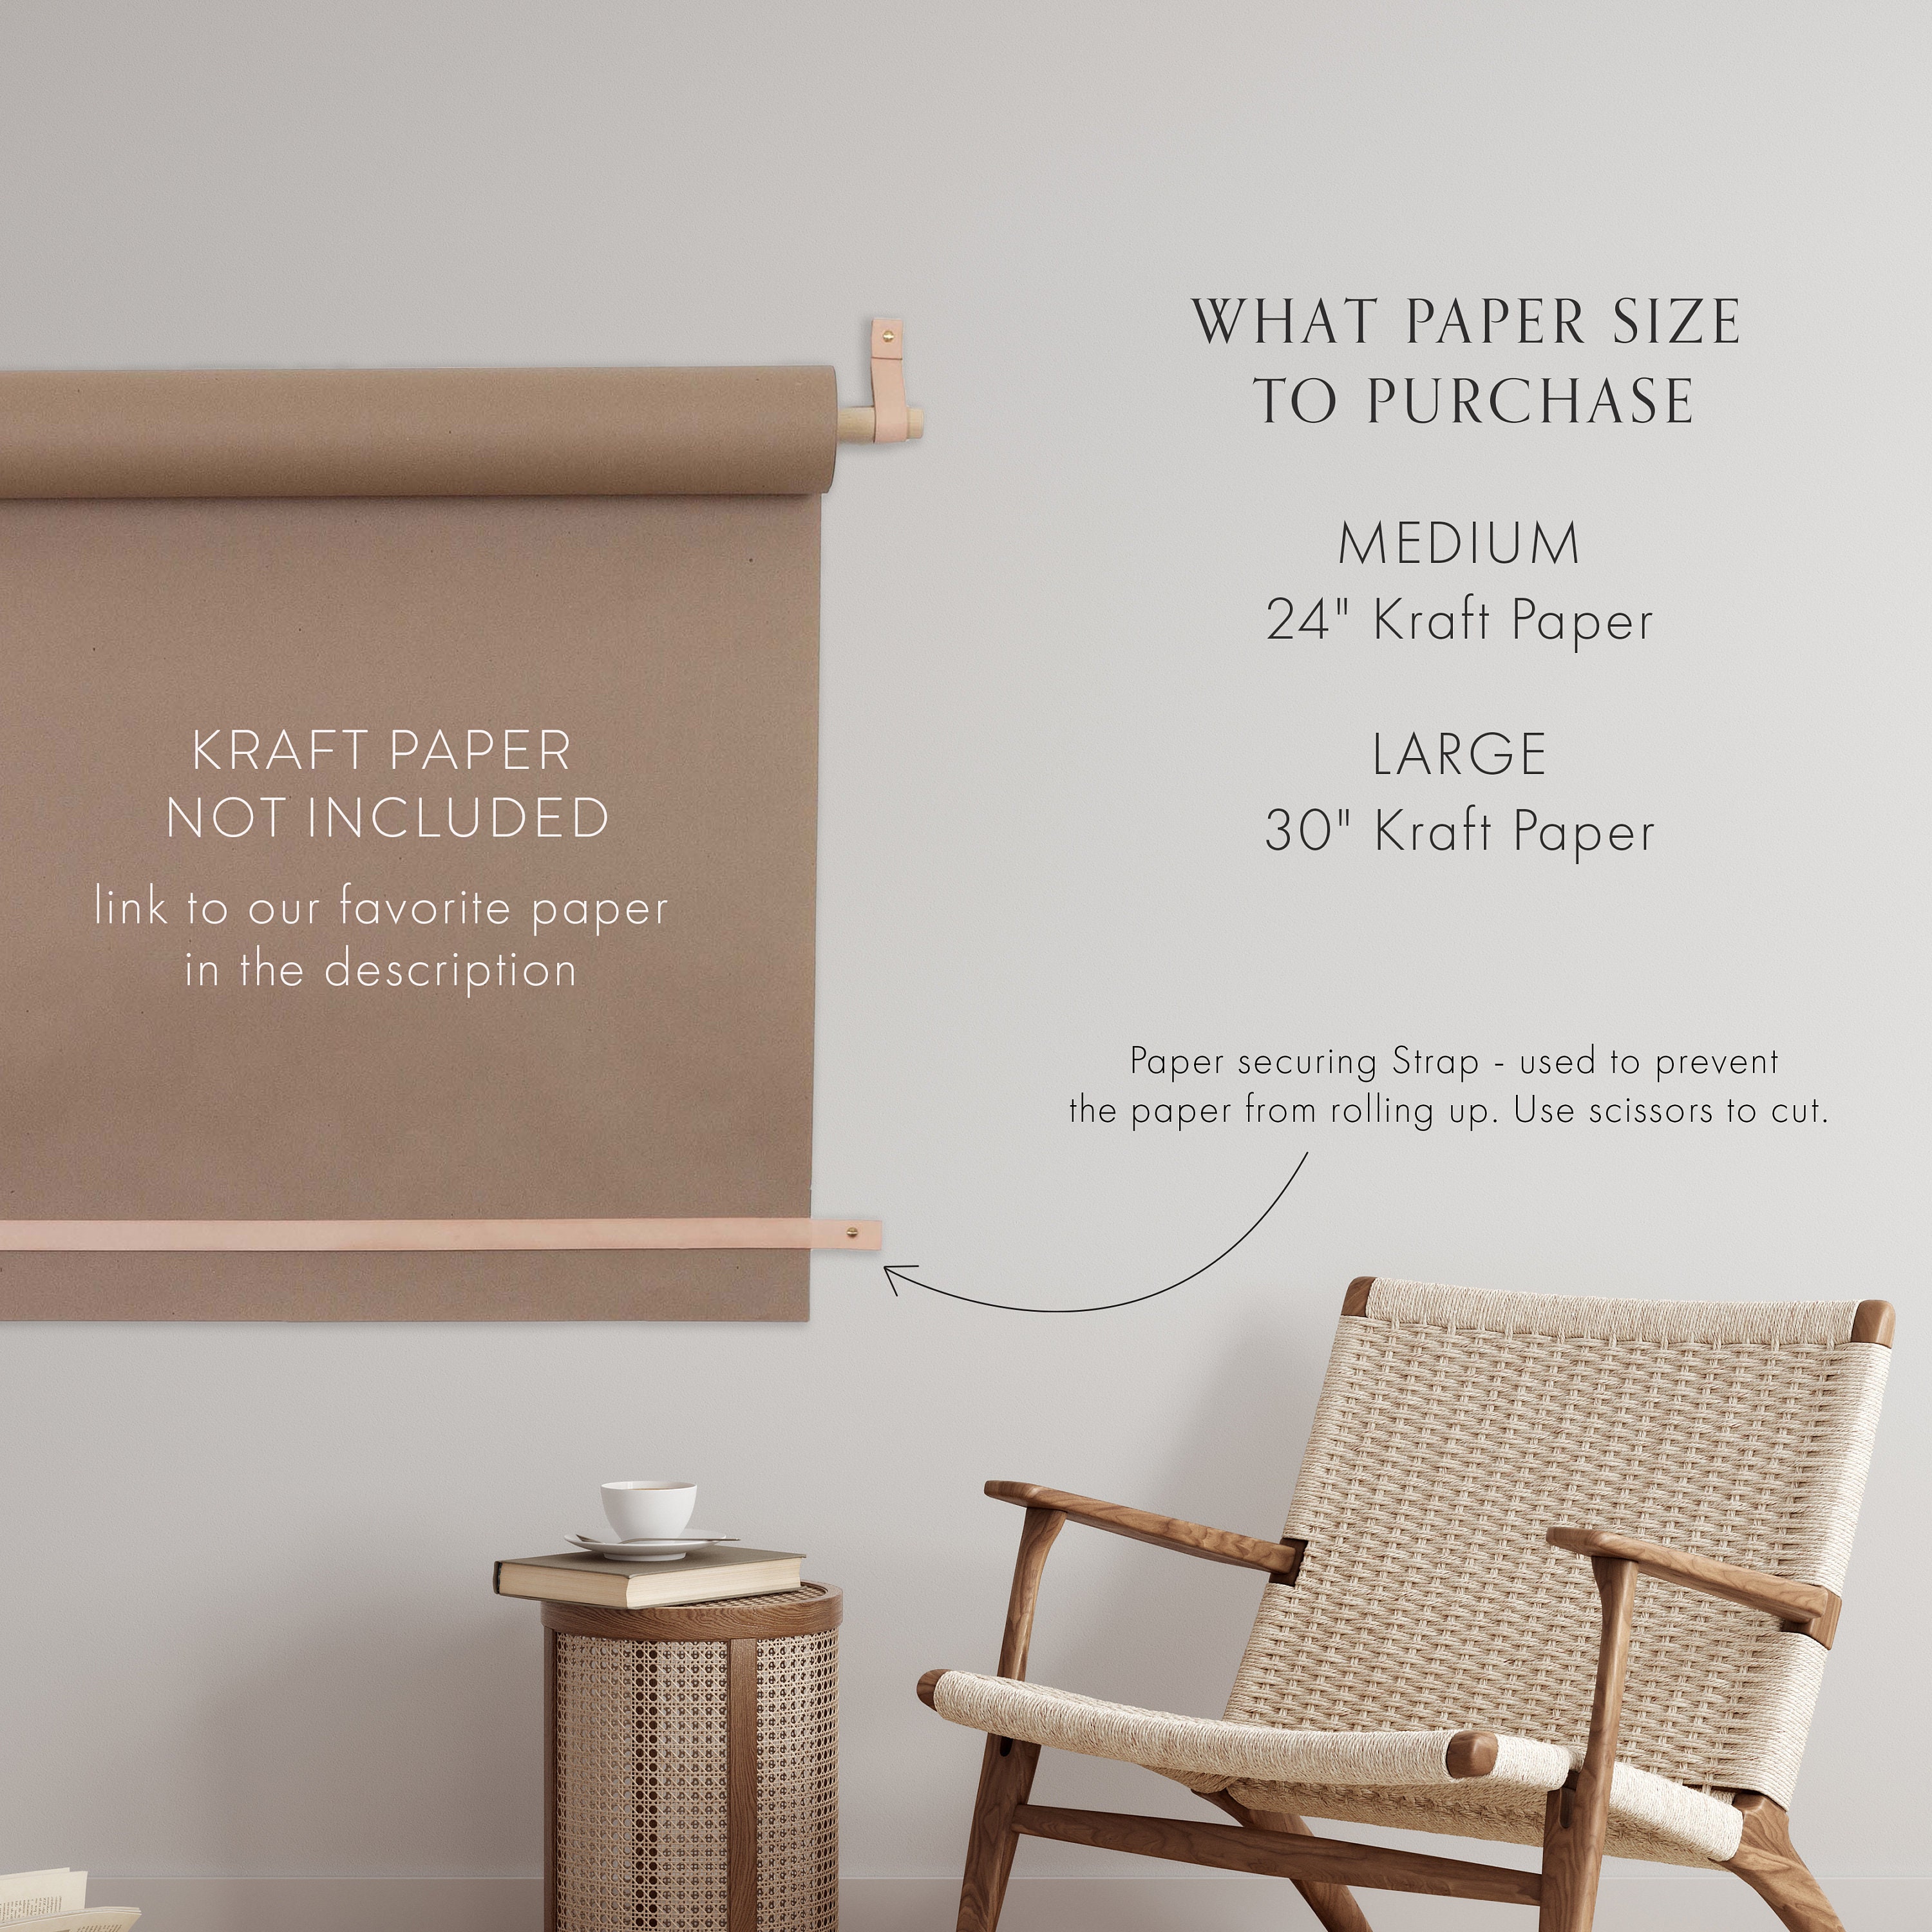 2 Things You Need to Know About Black Butcher Paper